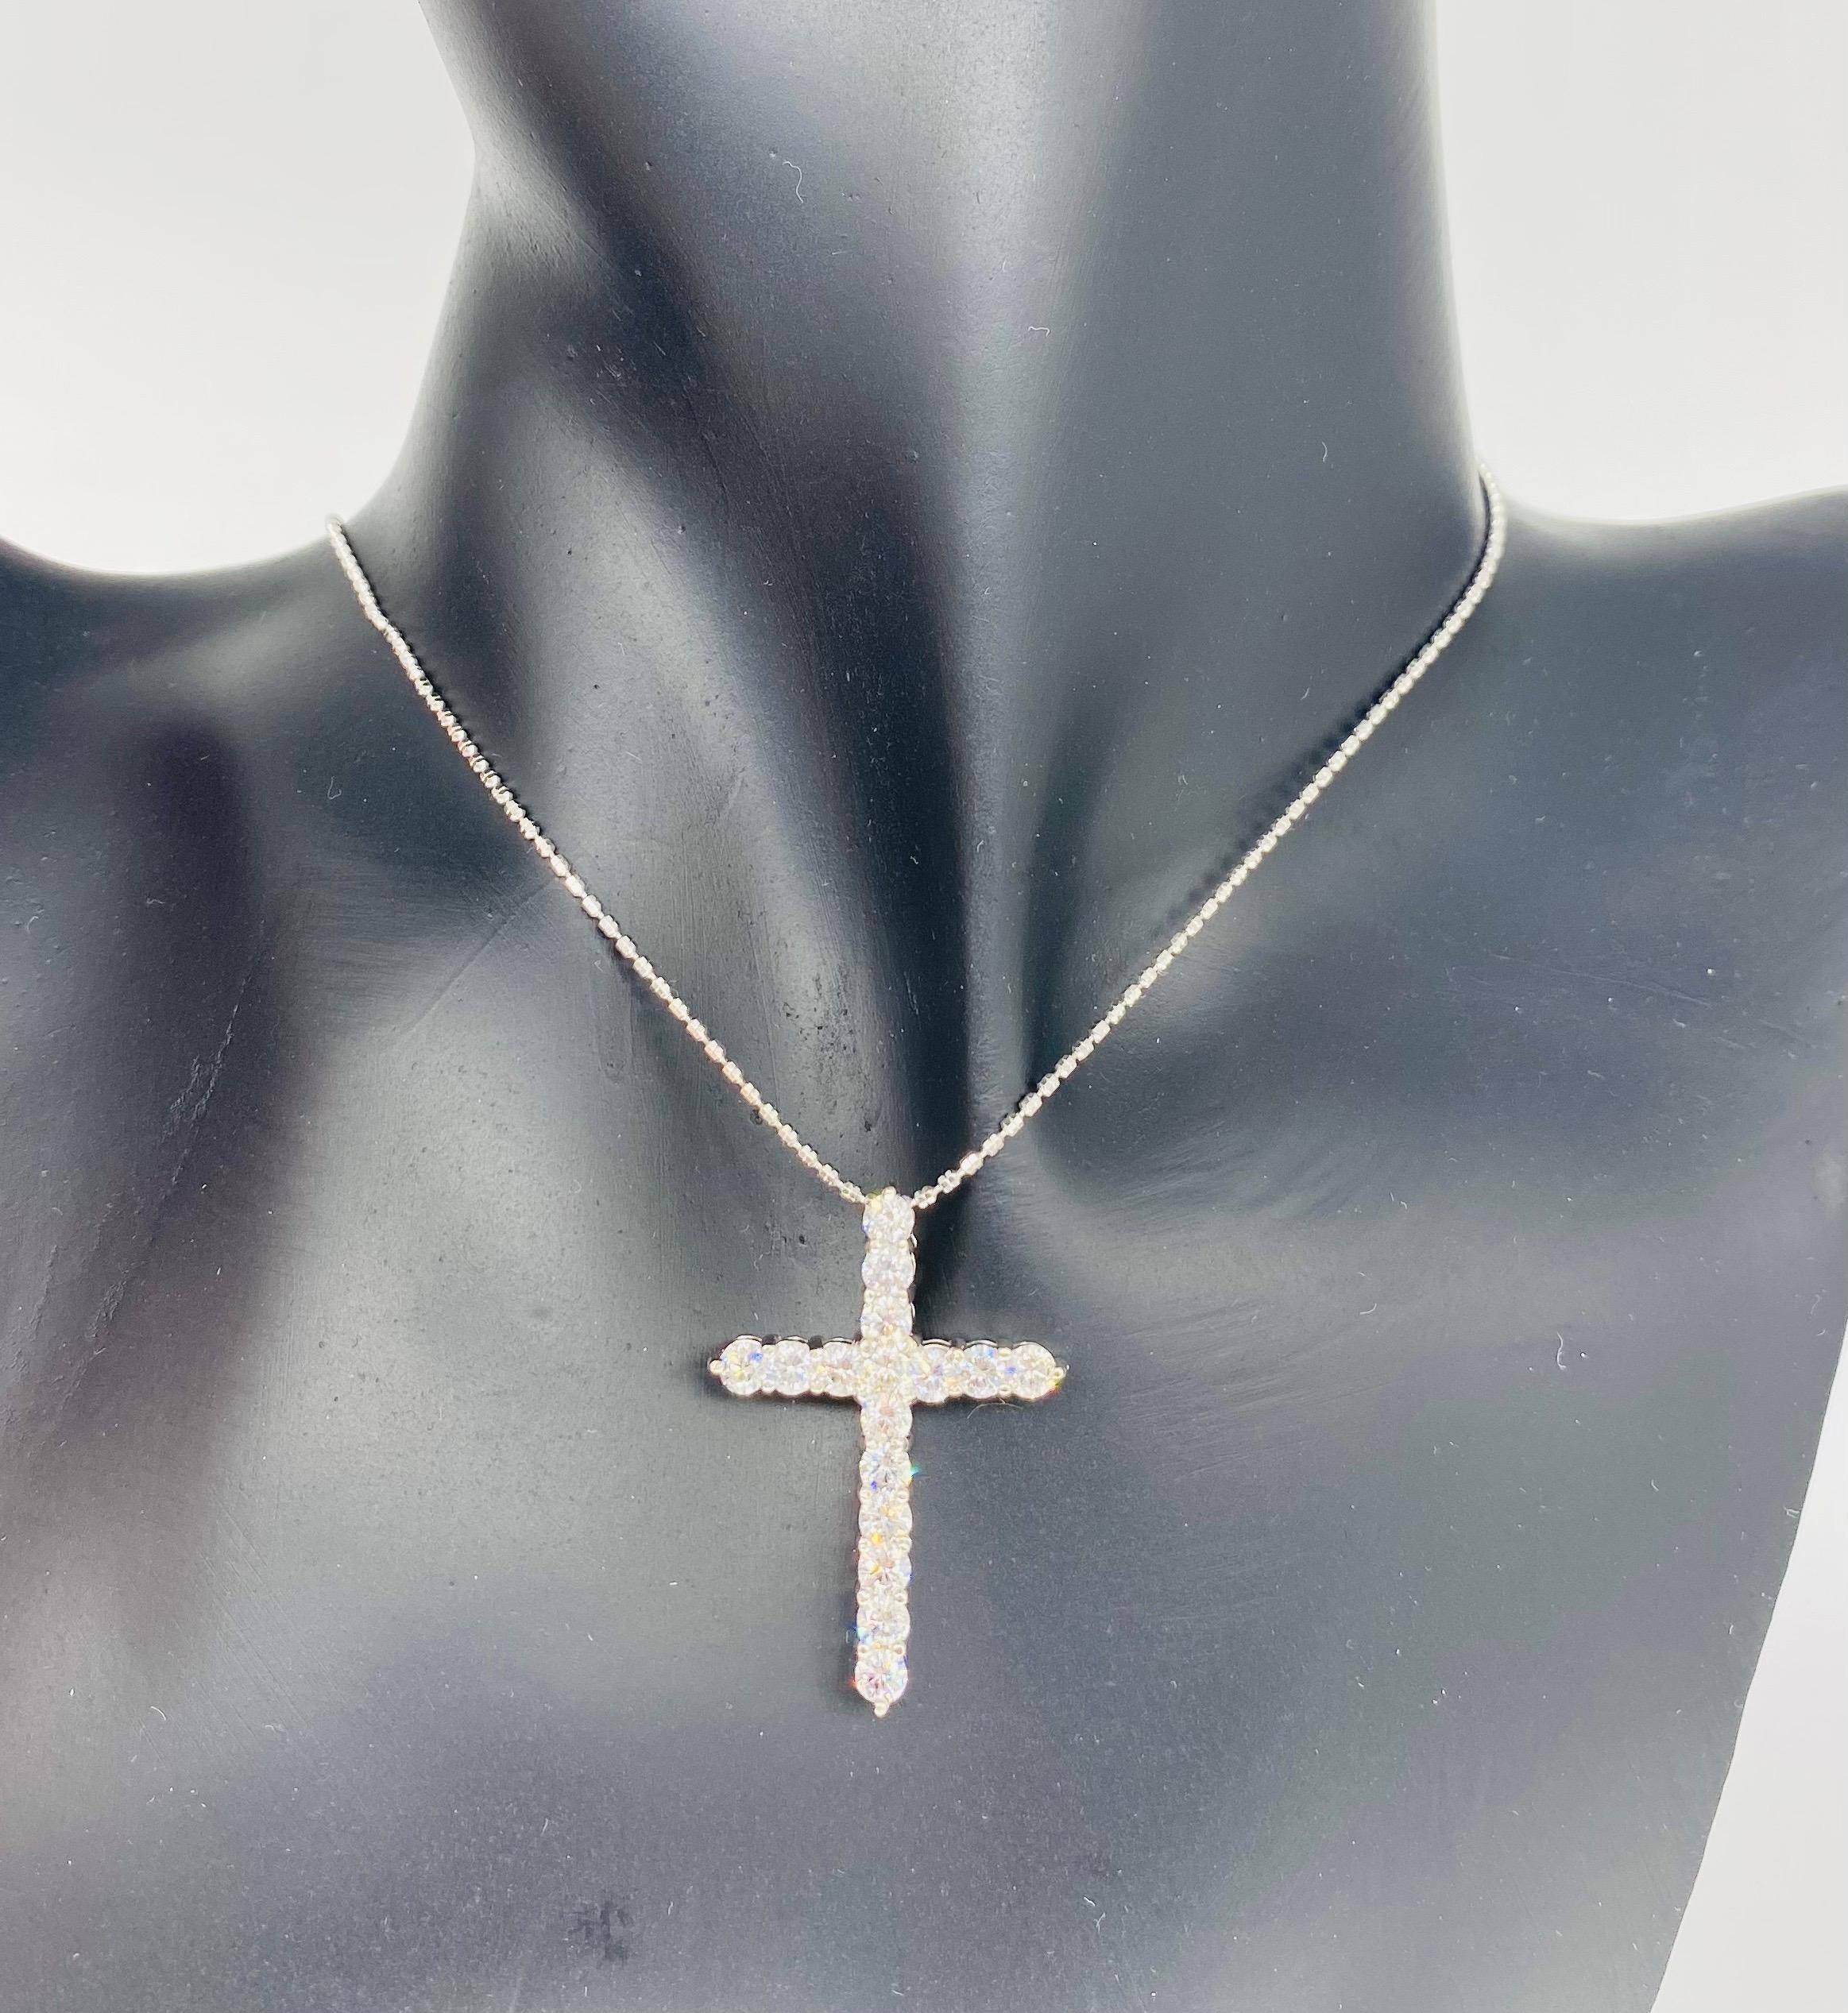 Modern 2.25 Carat Round Diamonds Cross Pendant 14k White Gold. The diamonds are white color clean clarity approx G/SI & very sparkly diamonds all 100% natural. The pendant weights 5 grams and measures 32mm X 33mm. 